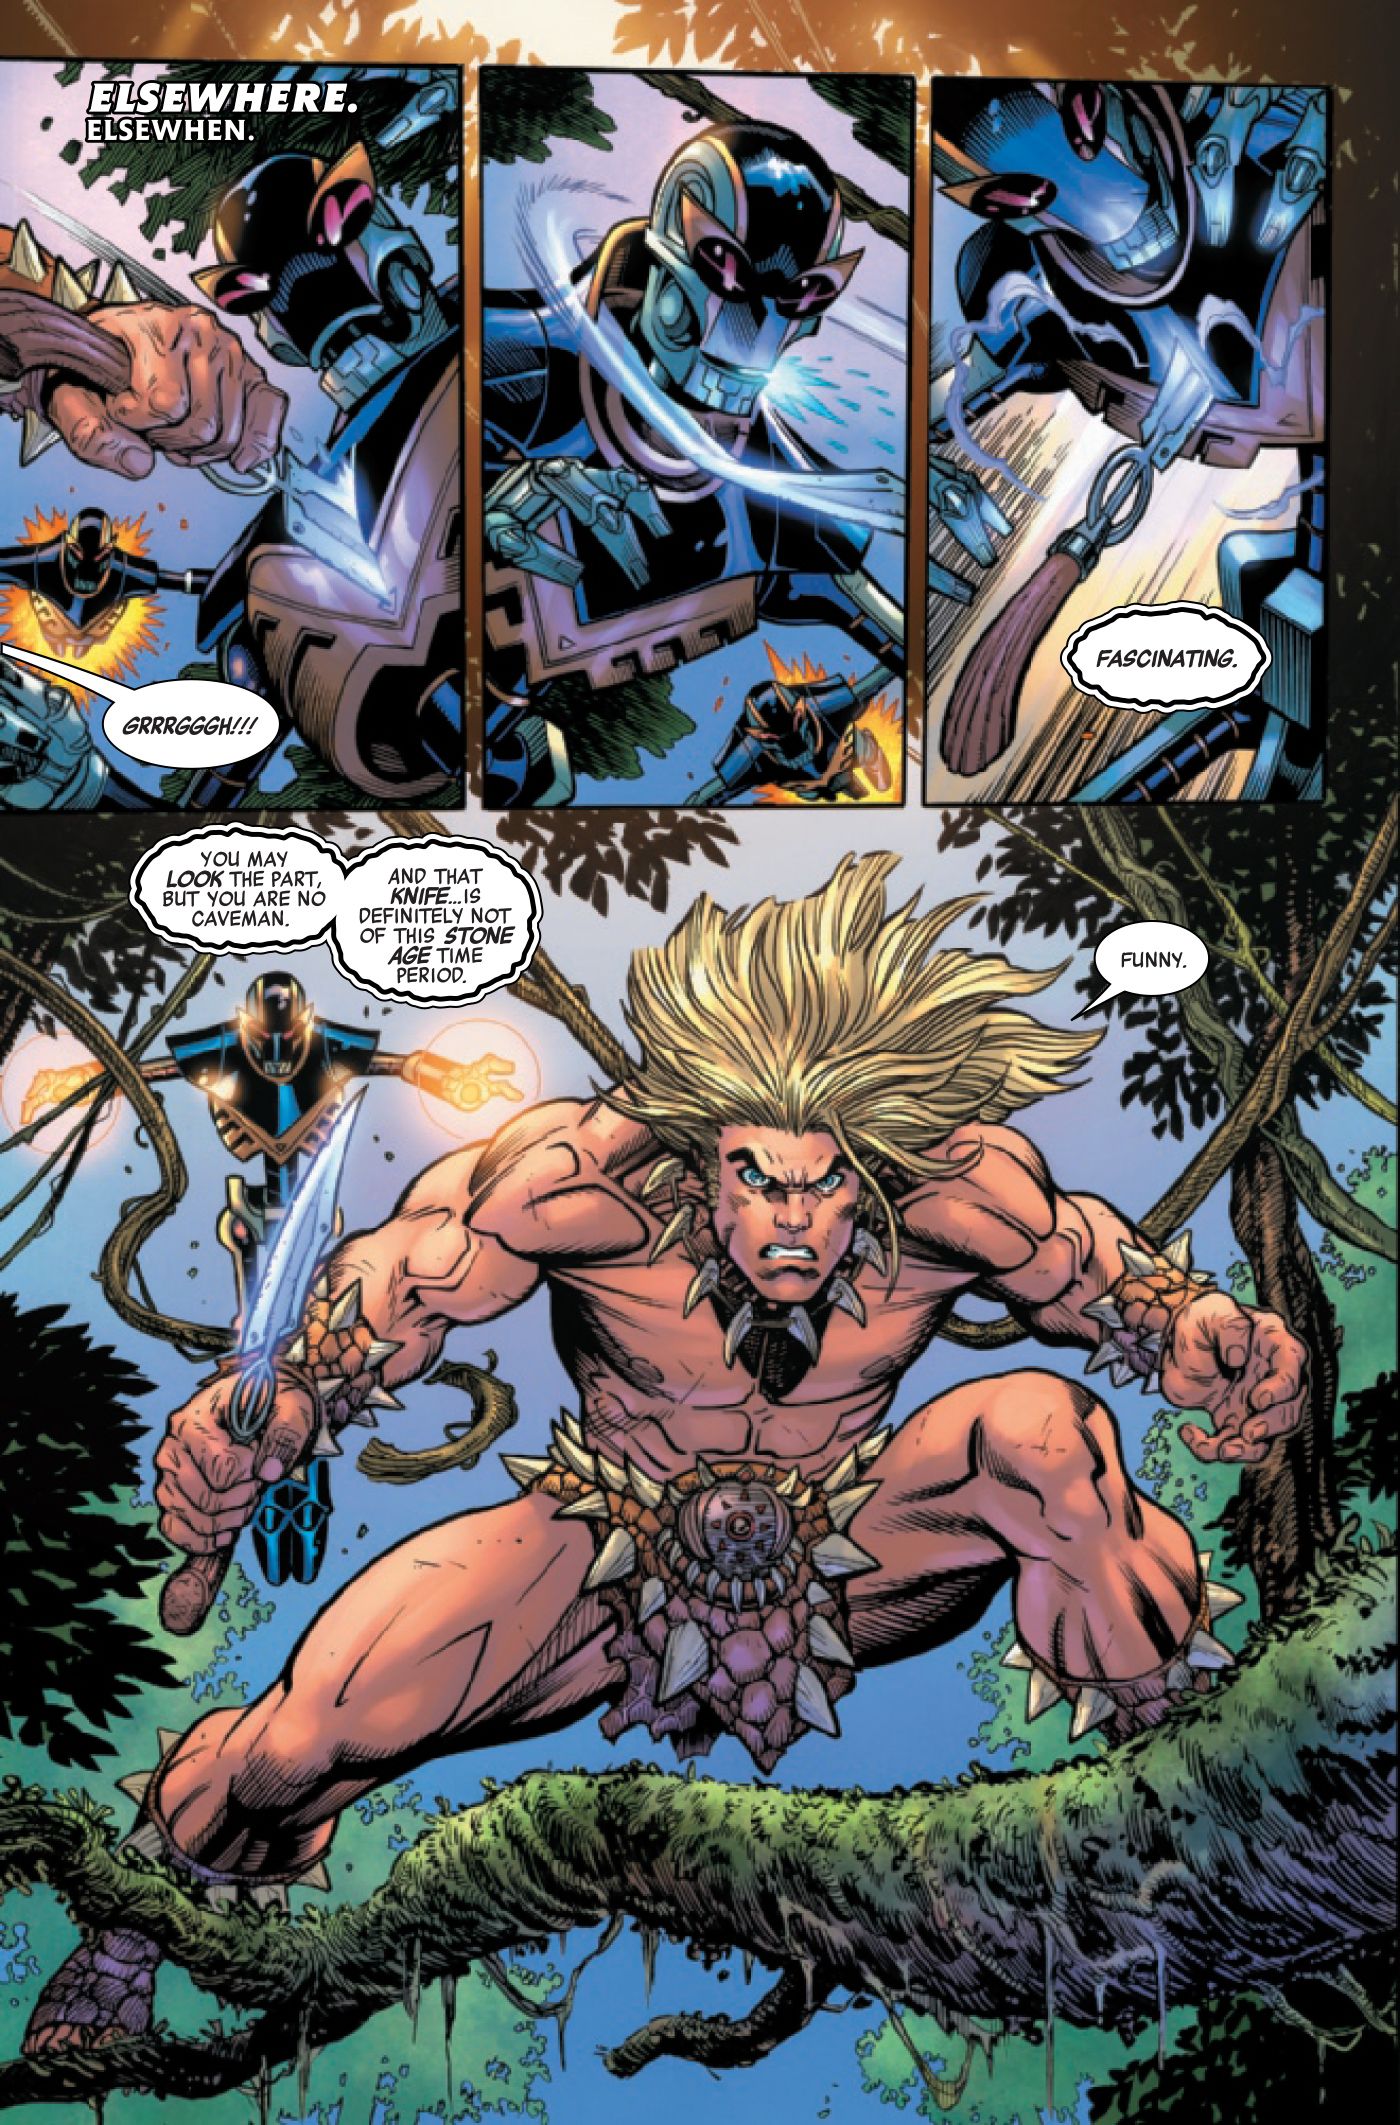 Ka-Zar fights robots in another time and place.